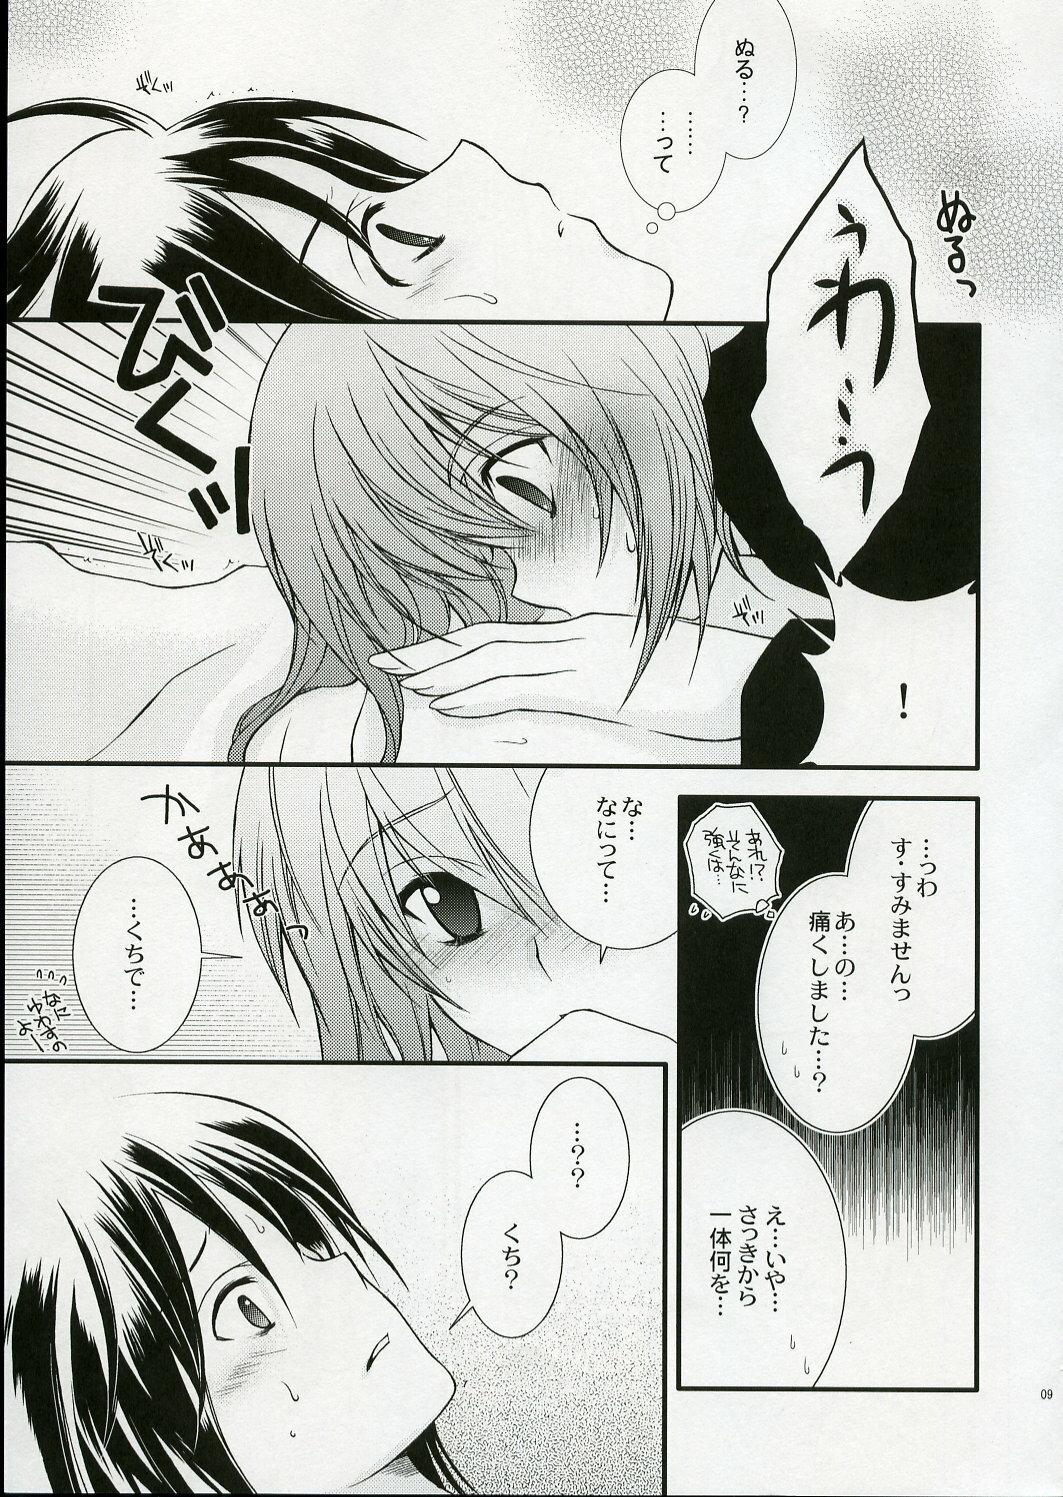 (SC28) [YLANG-YLANG (Ichie Ryouko)] RENDEZ-VOUS (Mobile Suit Gundam SEED DESTINY) page 8 full